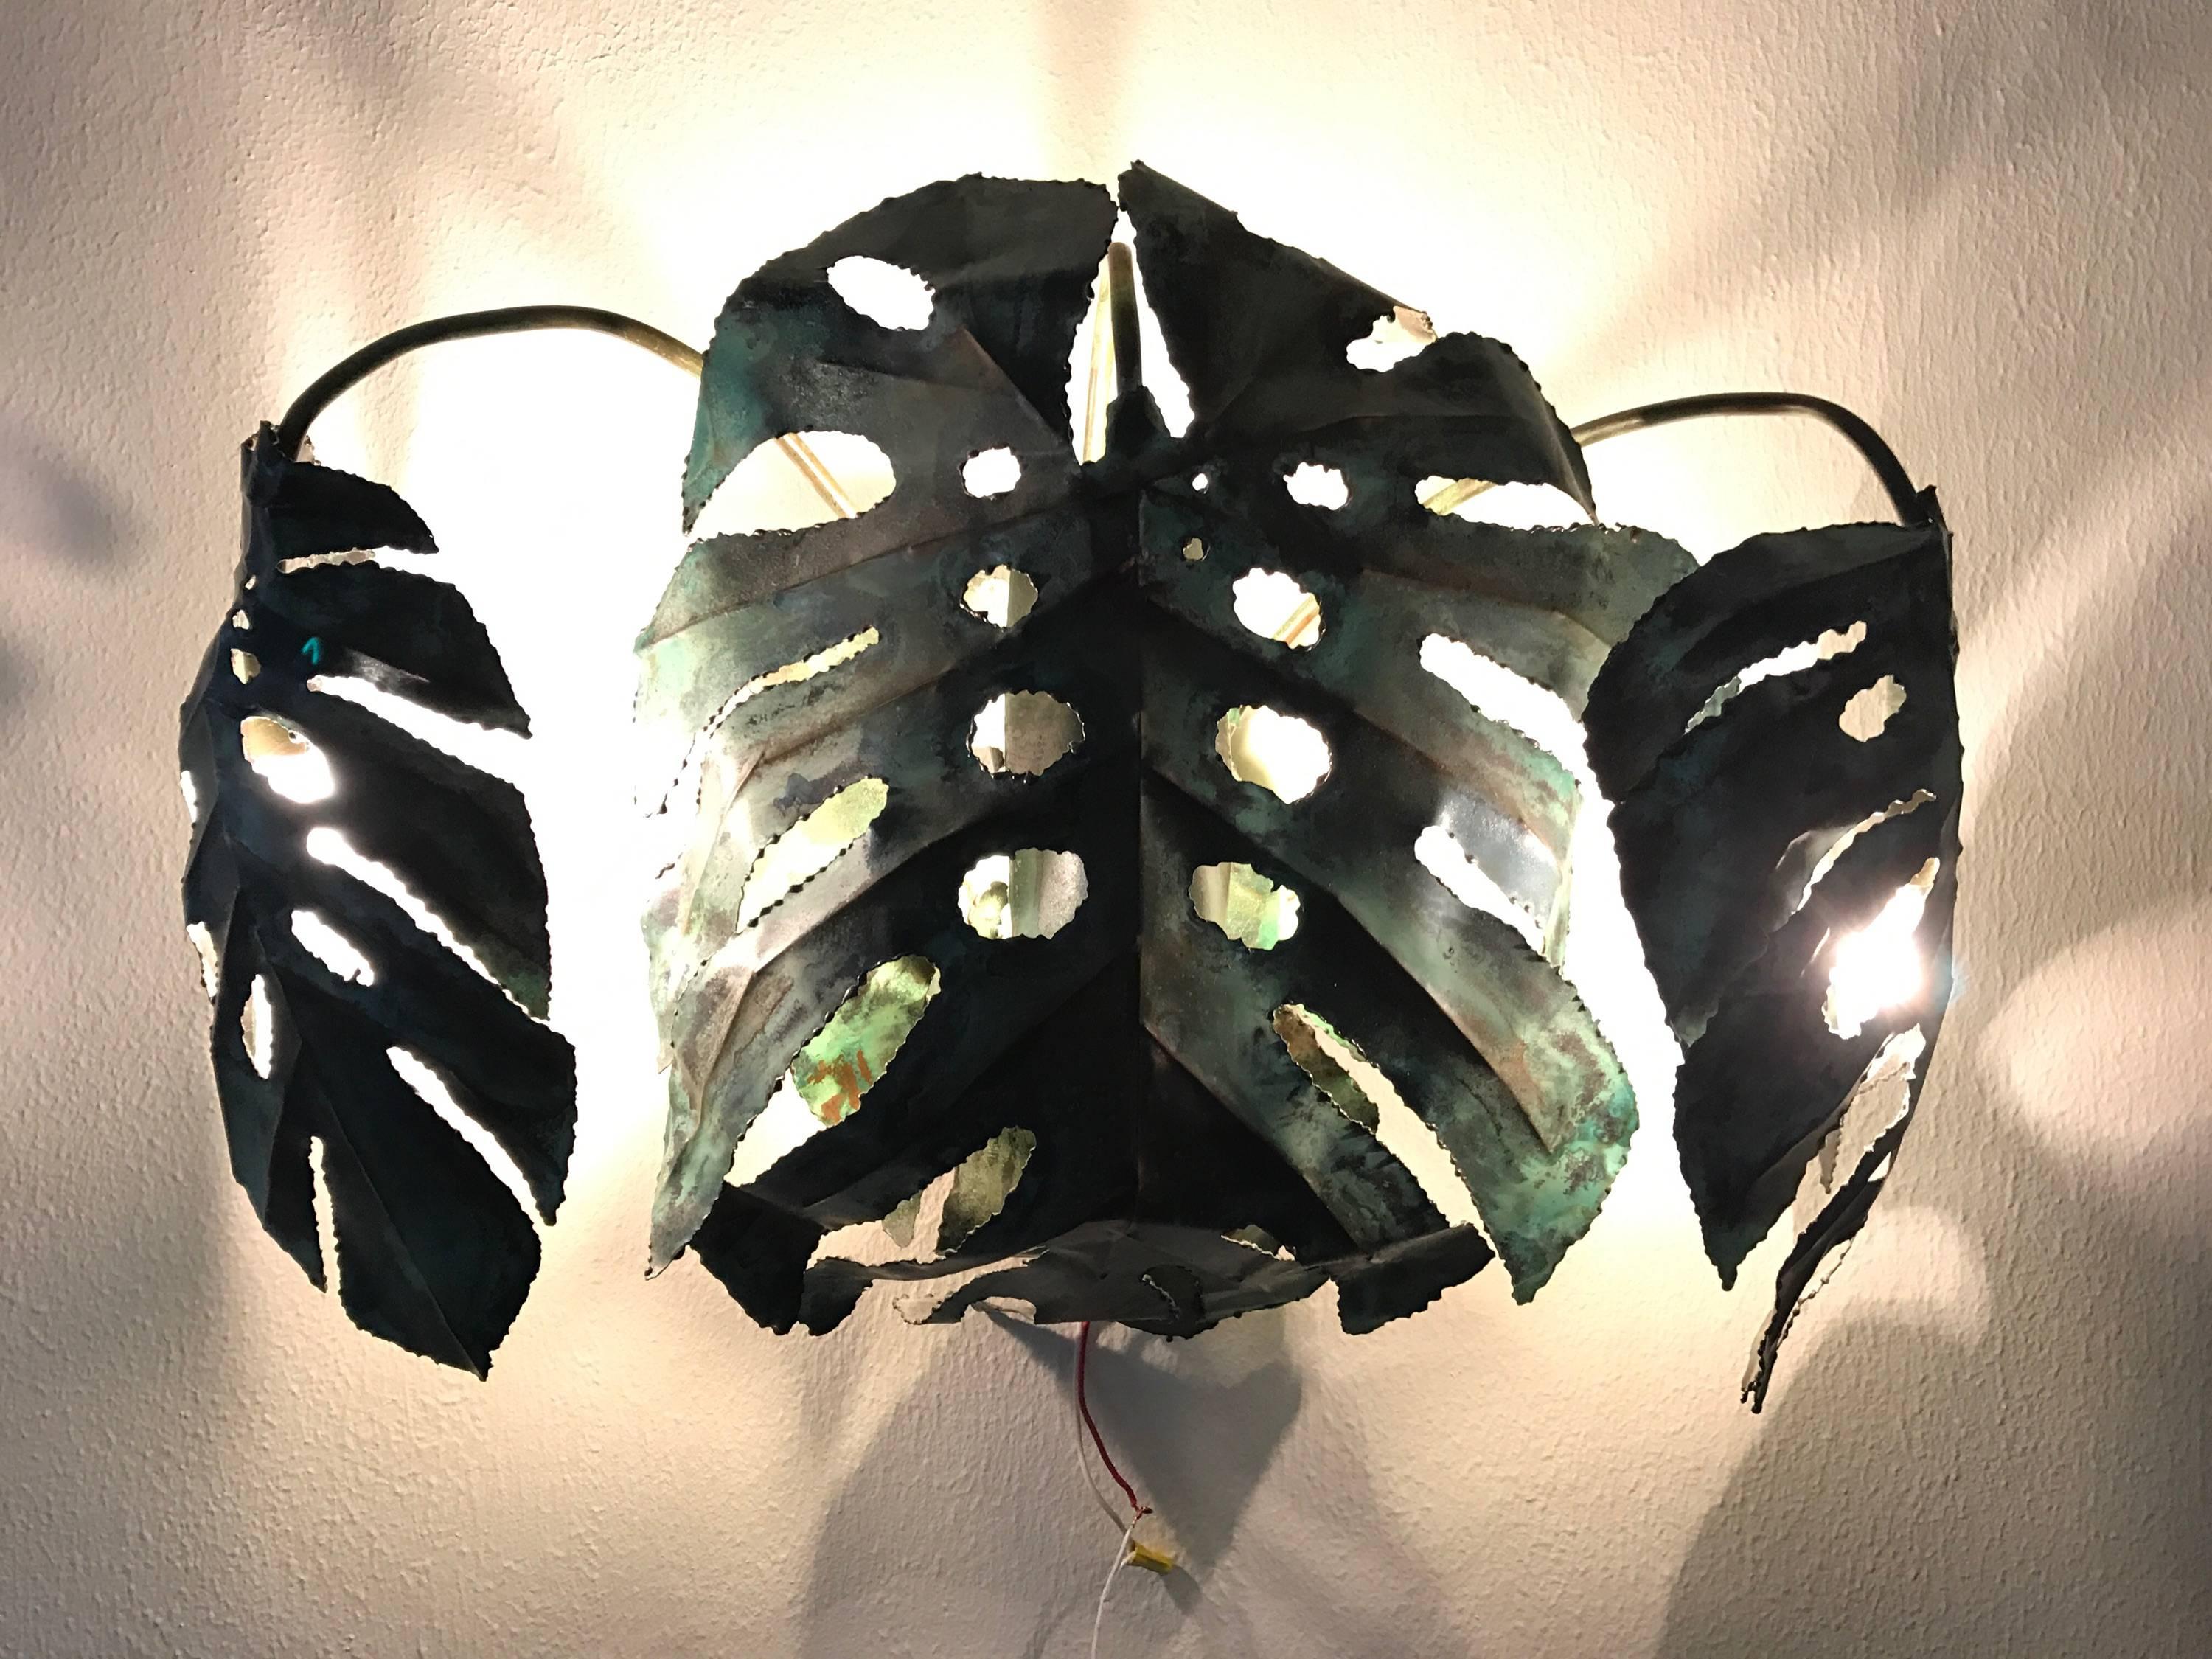 This is an original copper enameled wall sconce made in the 1960s by the late Garland Faulkner of Miami Florida.
Sculpted and executed to look like the Monstera deliciosa (Swiss cheese plant / hurricane plant) this artist signed enameled copper